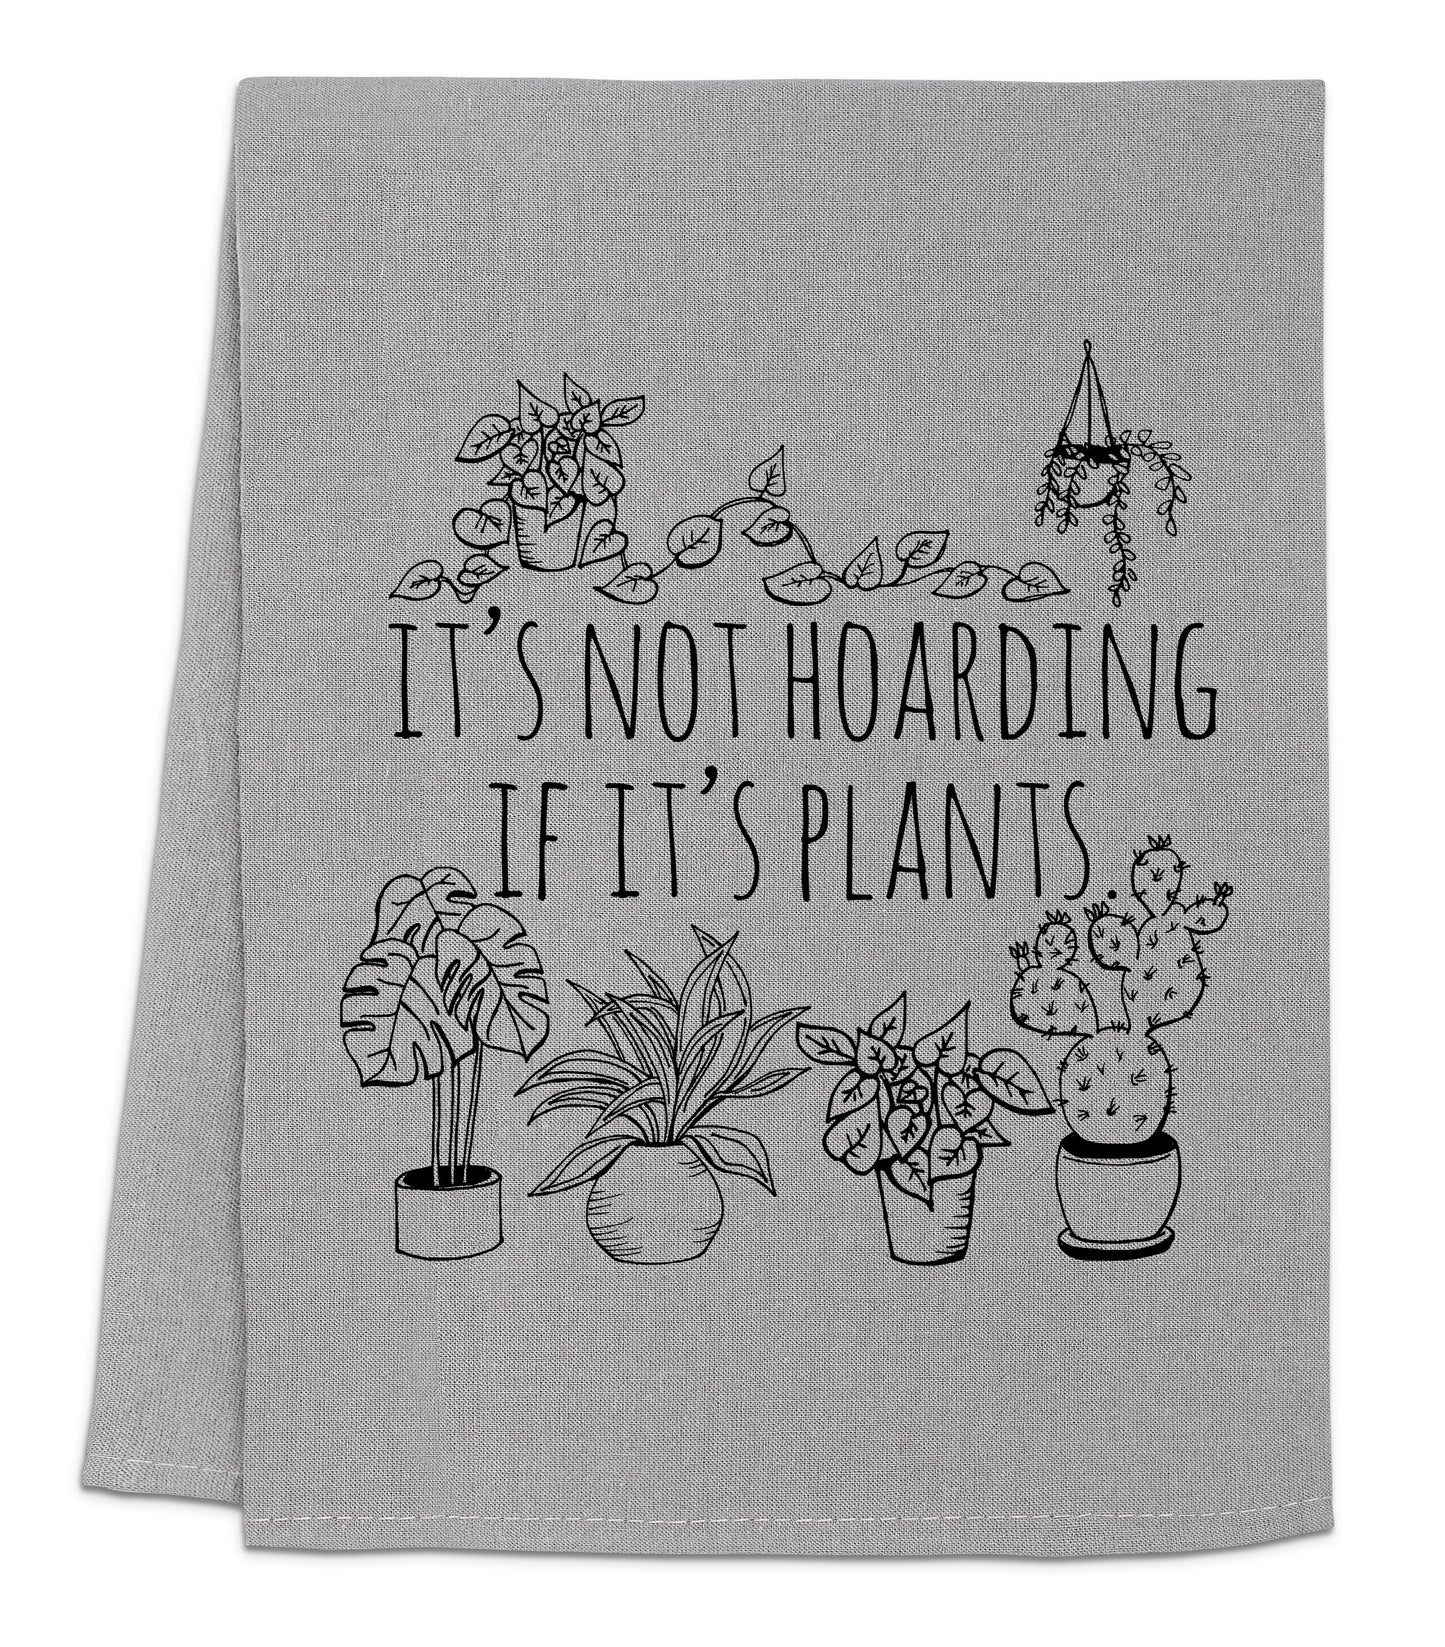 a towel that says it's not hoarding if it's plants